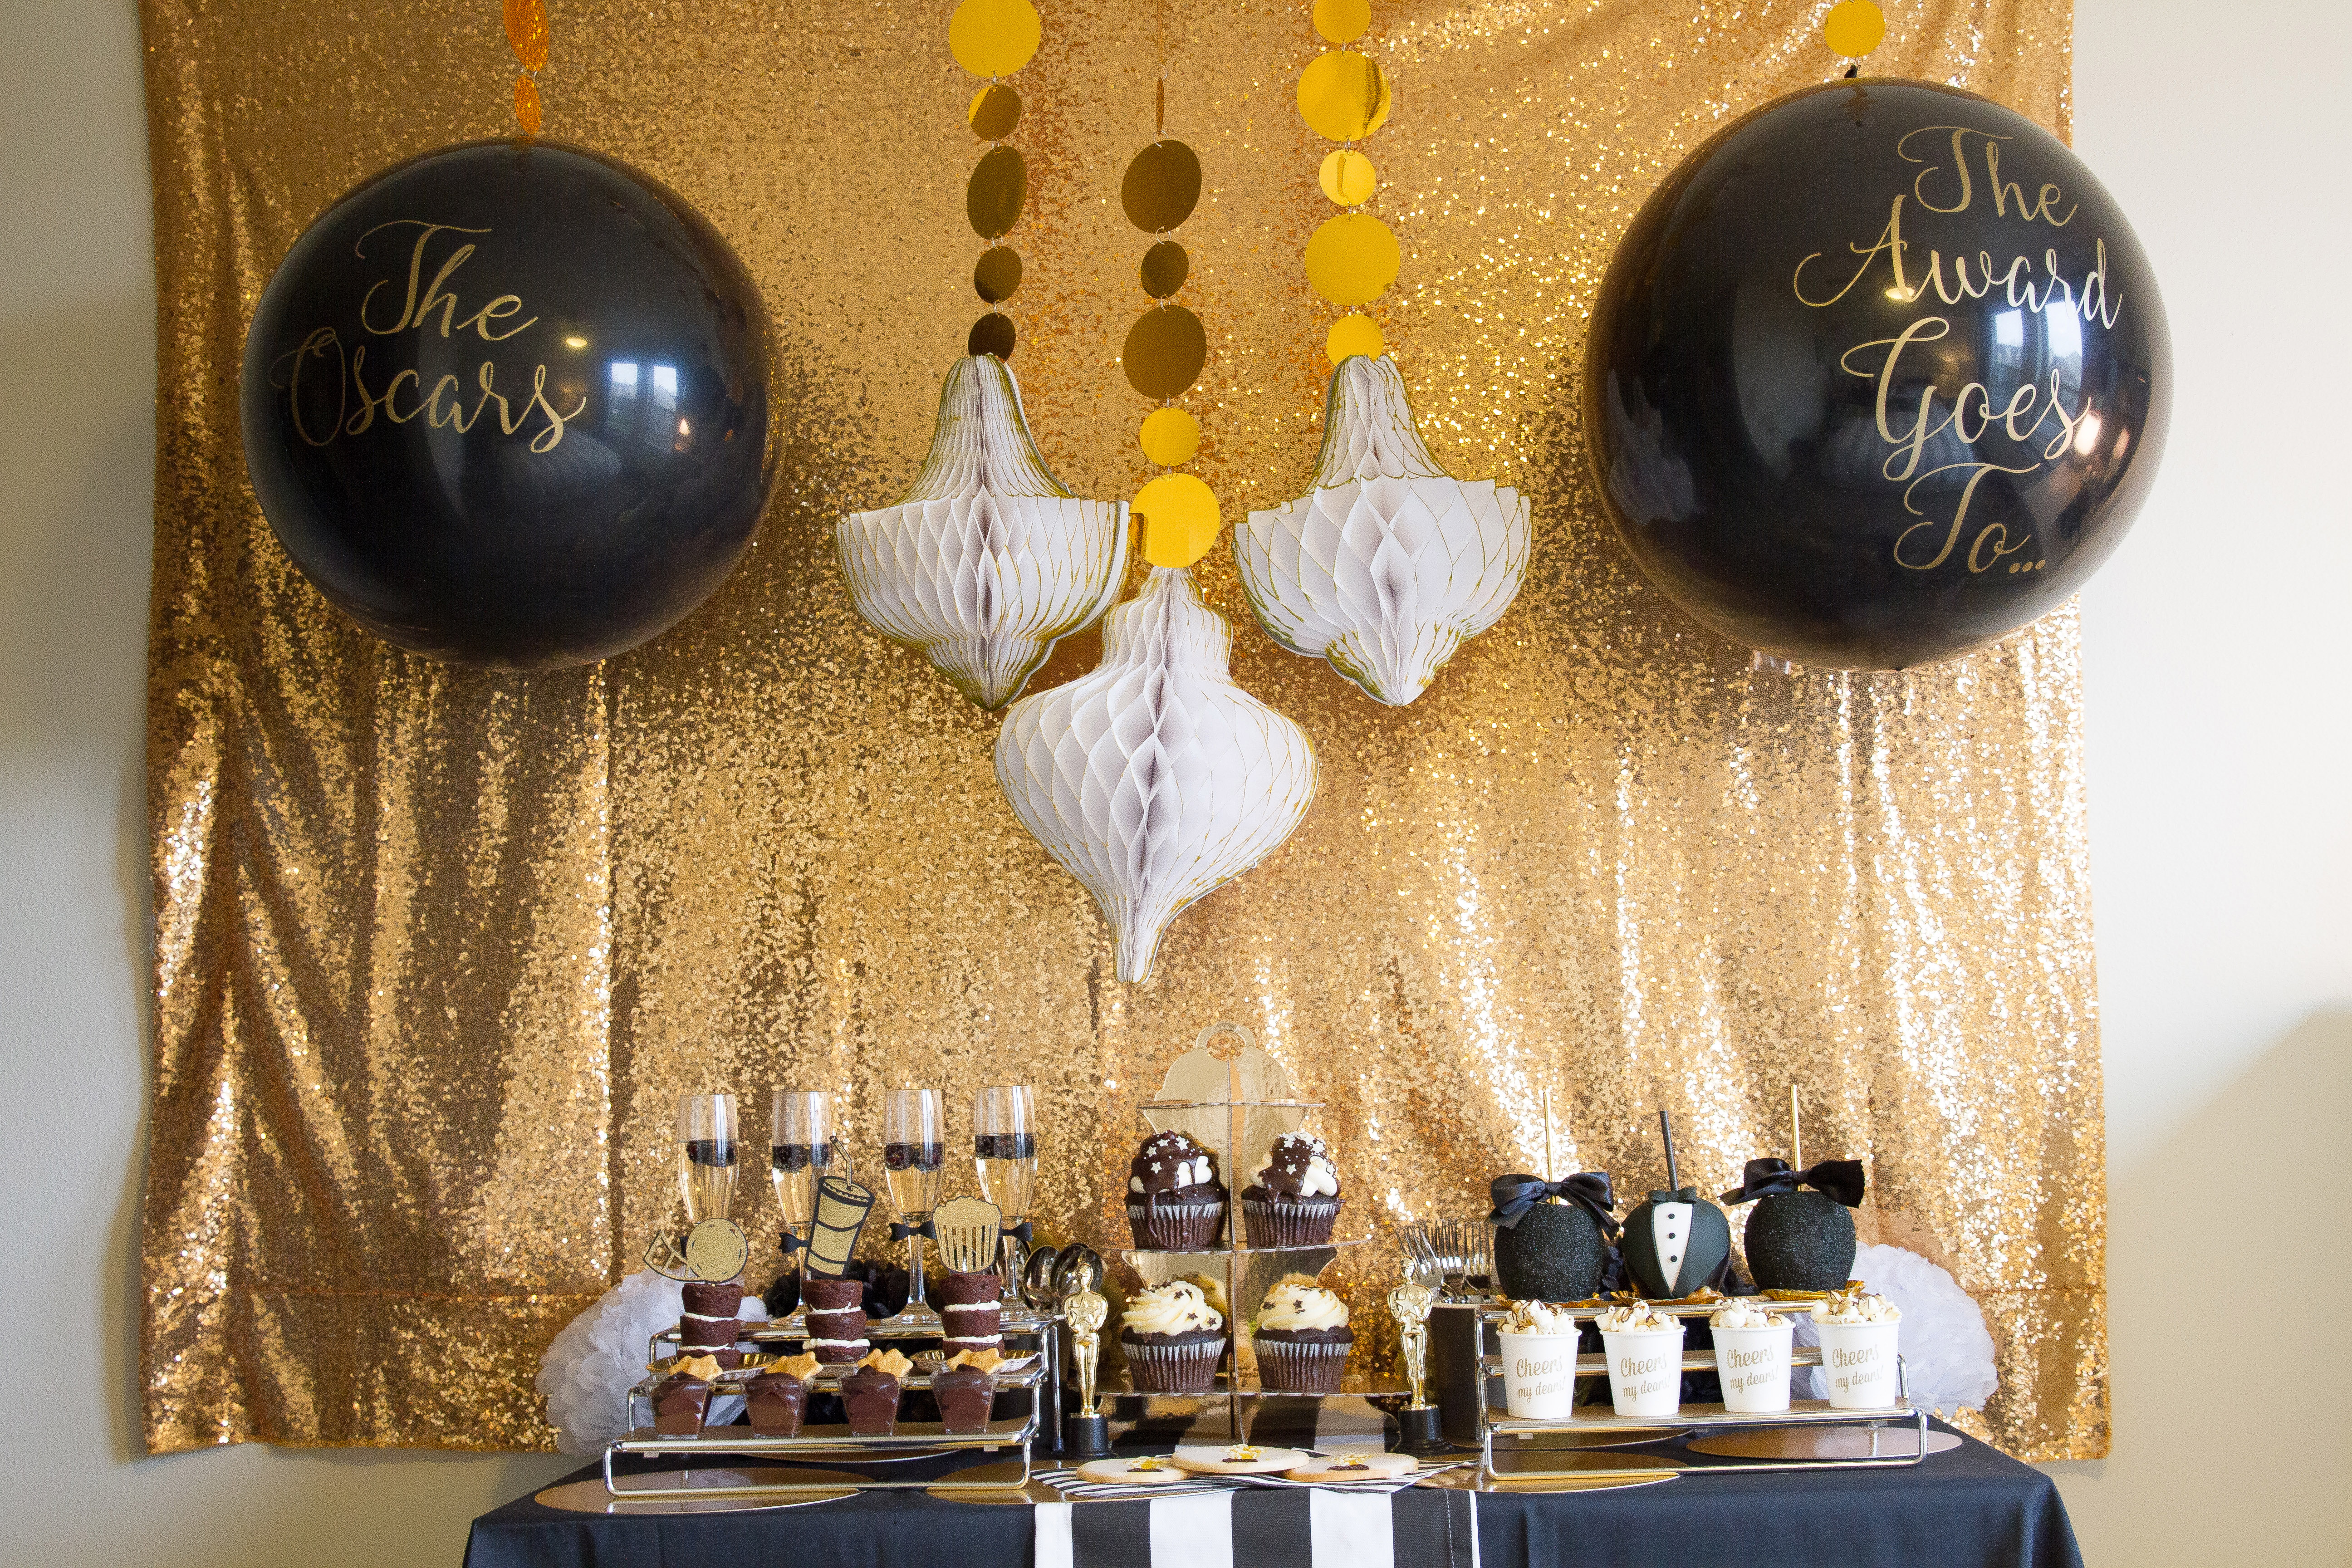 Tuxedo Oscar Party With Eden Celebrations! -See More Oscar Party Ideas On B. Lovely Events